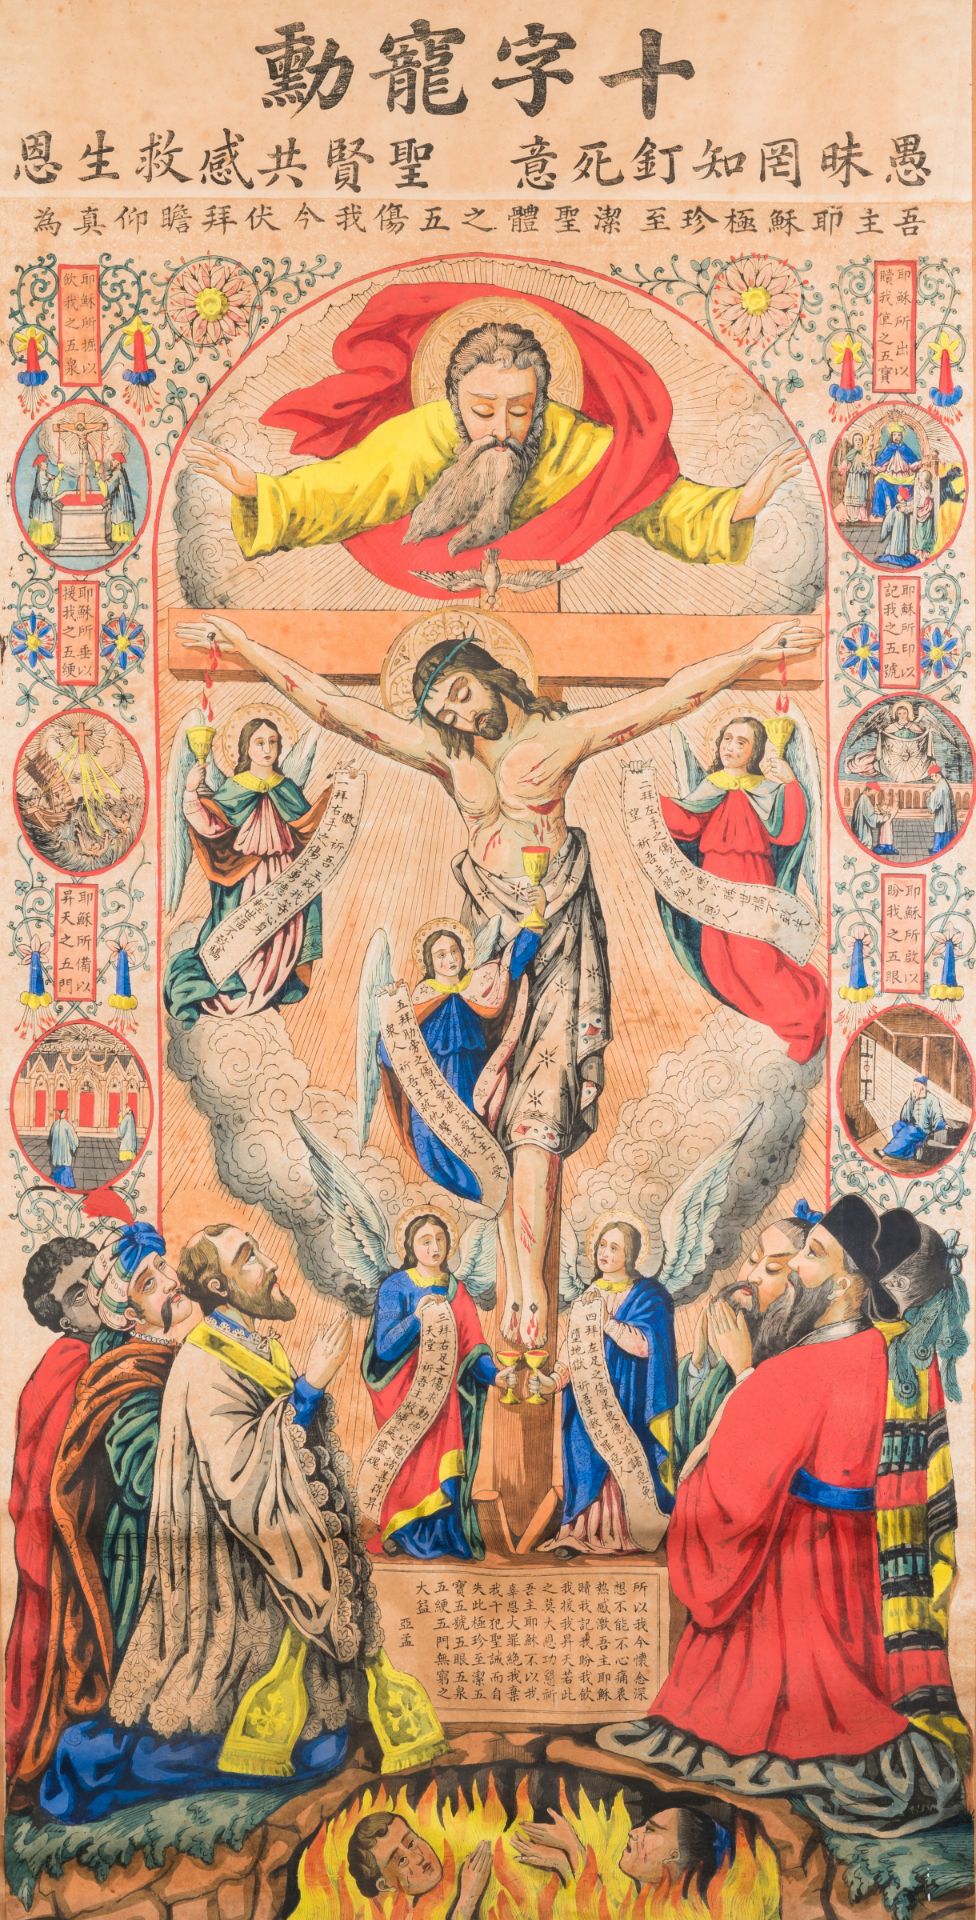 Belgian Catholic missionaries in China: 'The five wounds of Christ', engraving with painted details